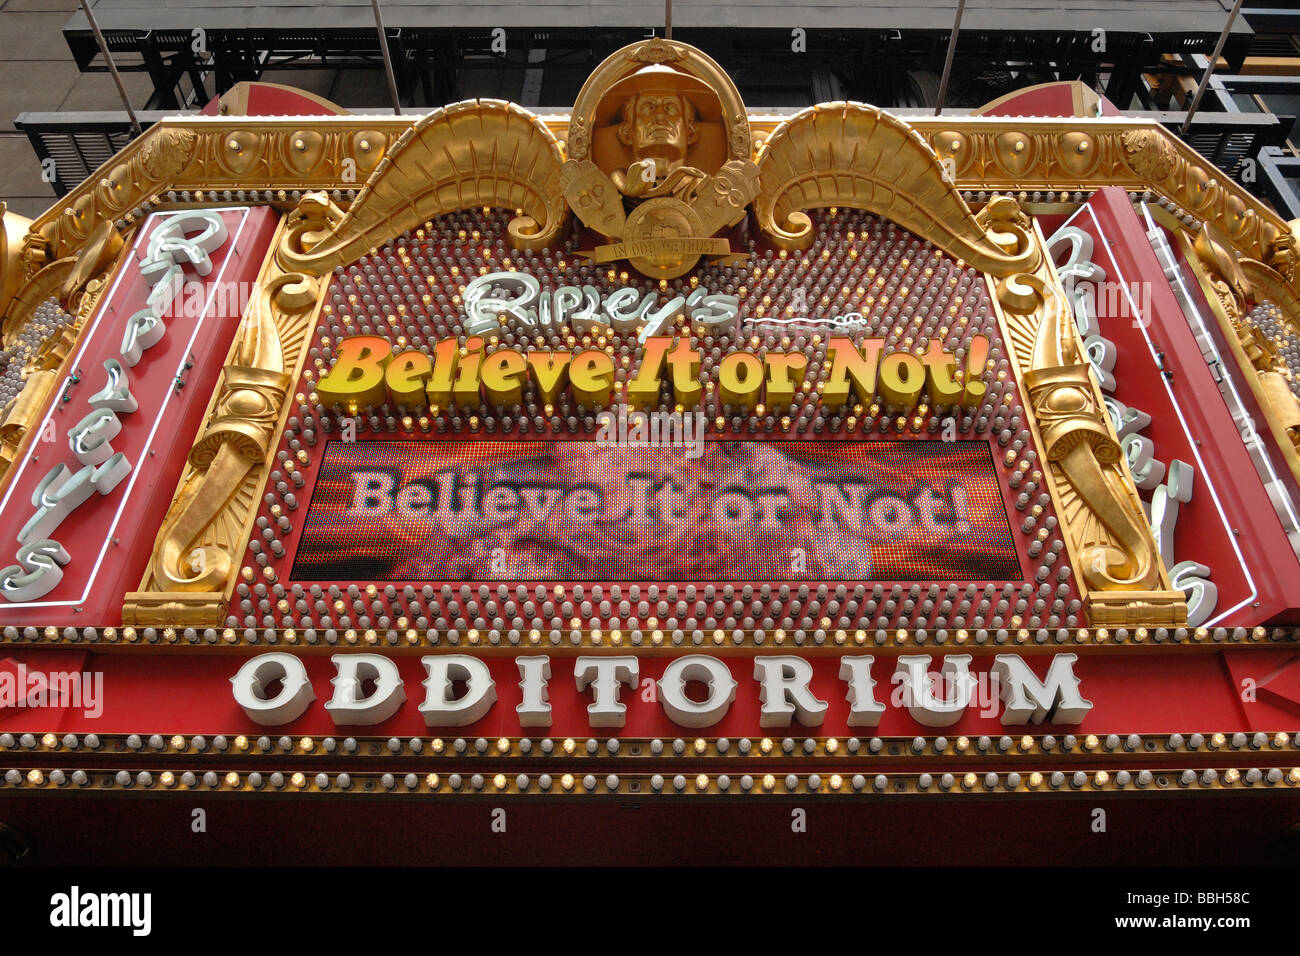 Ripley s Believe It Or Not Odditorium New York NY USA Banque D'Images